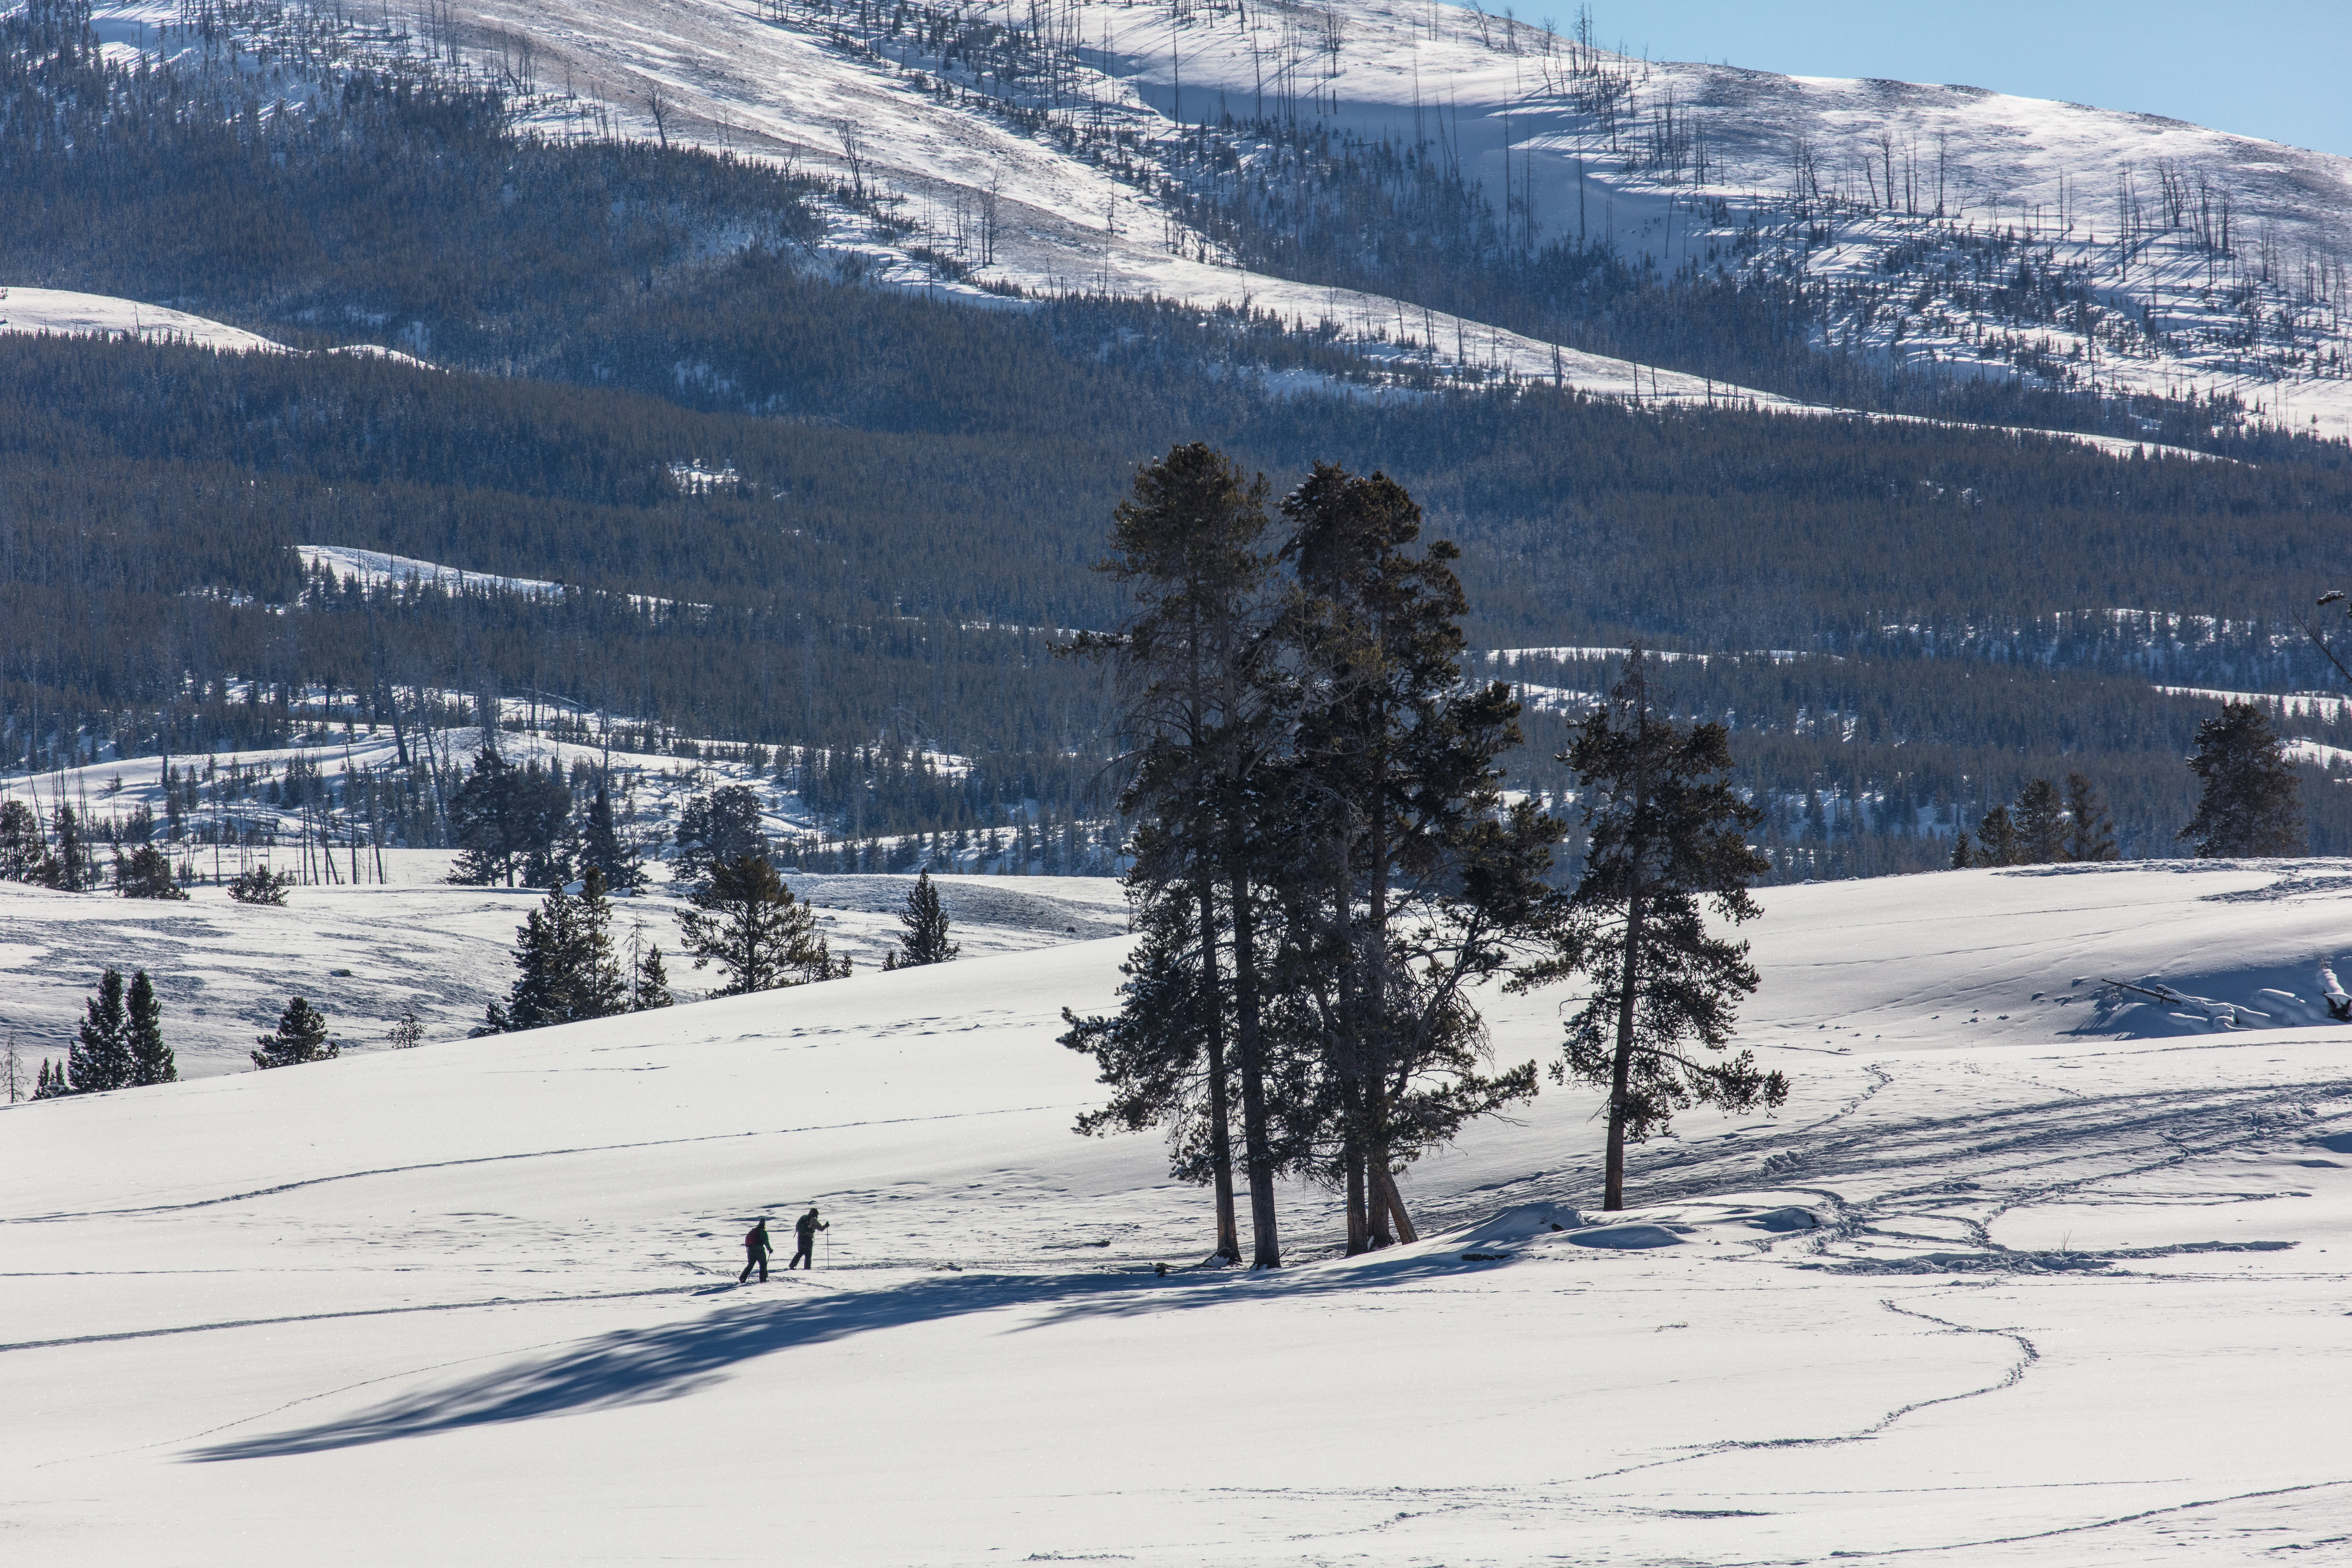 Two cross-country skiers skiing towards a small group of trees on an open hillside